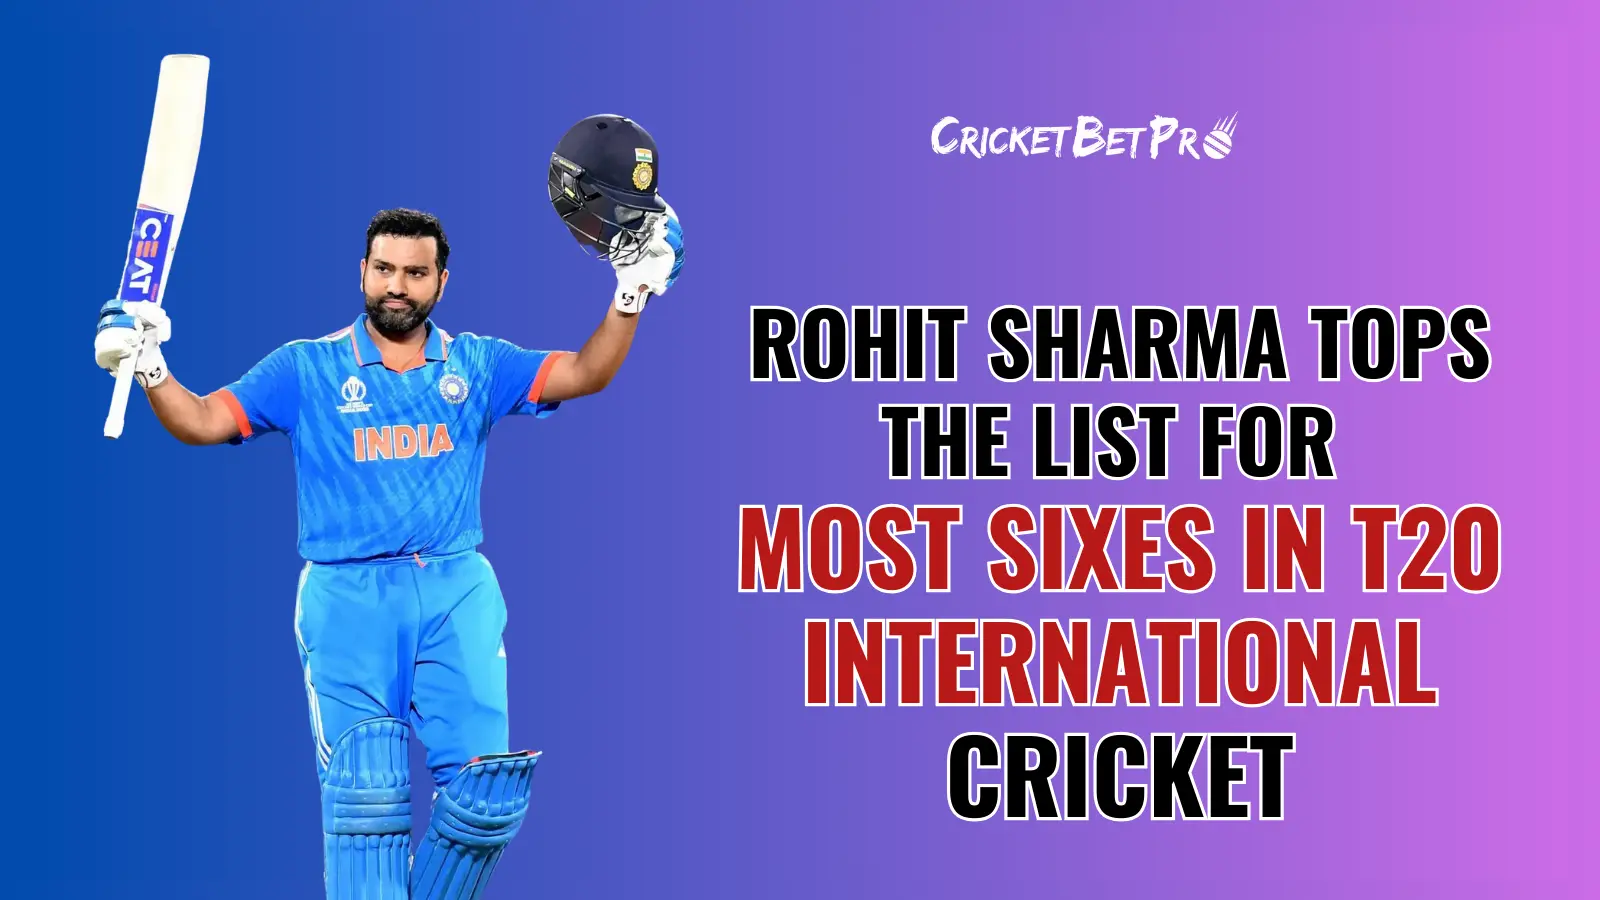 Rohit Sharma Tops the List for Most Sixes